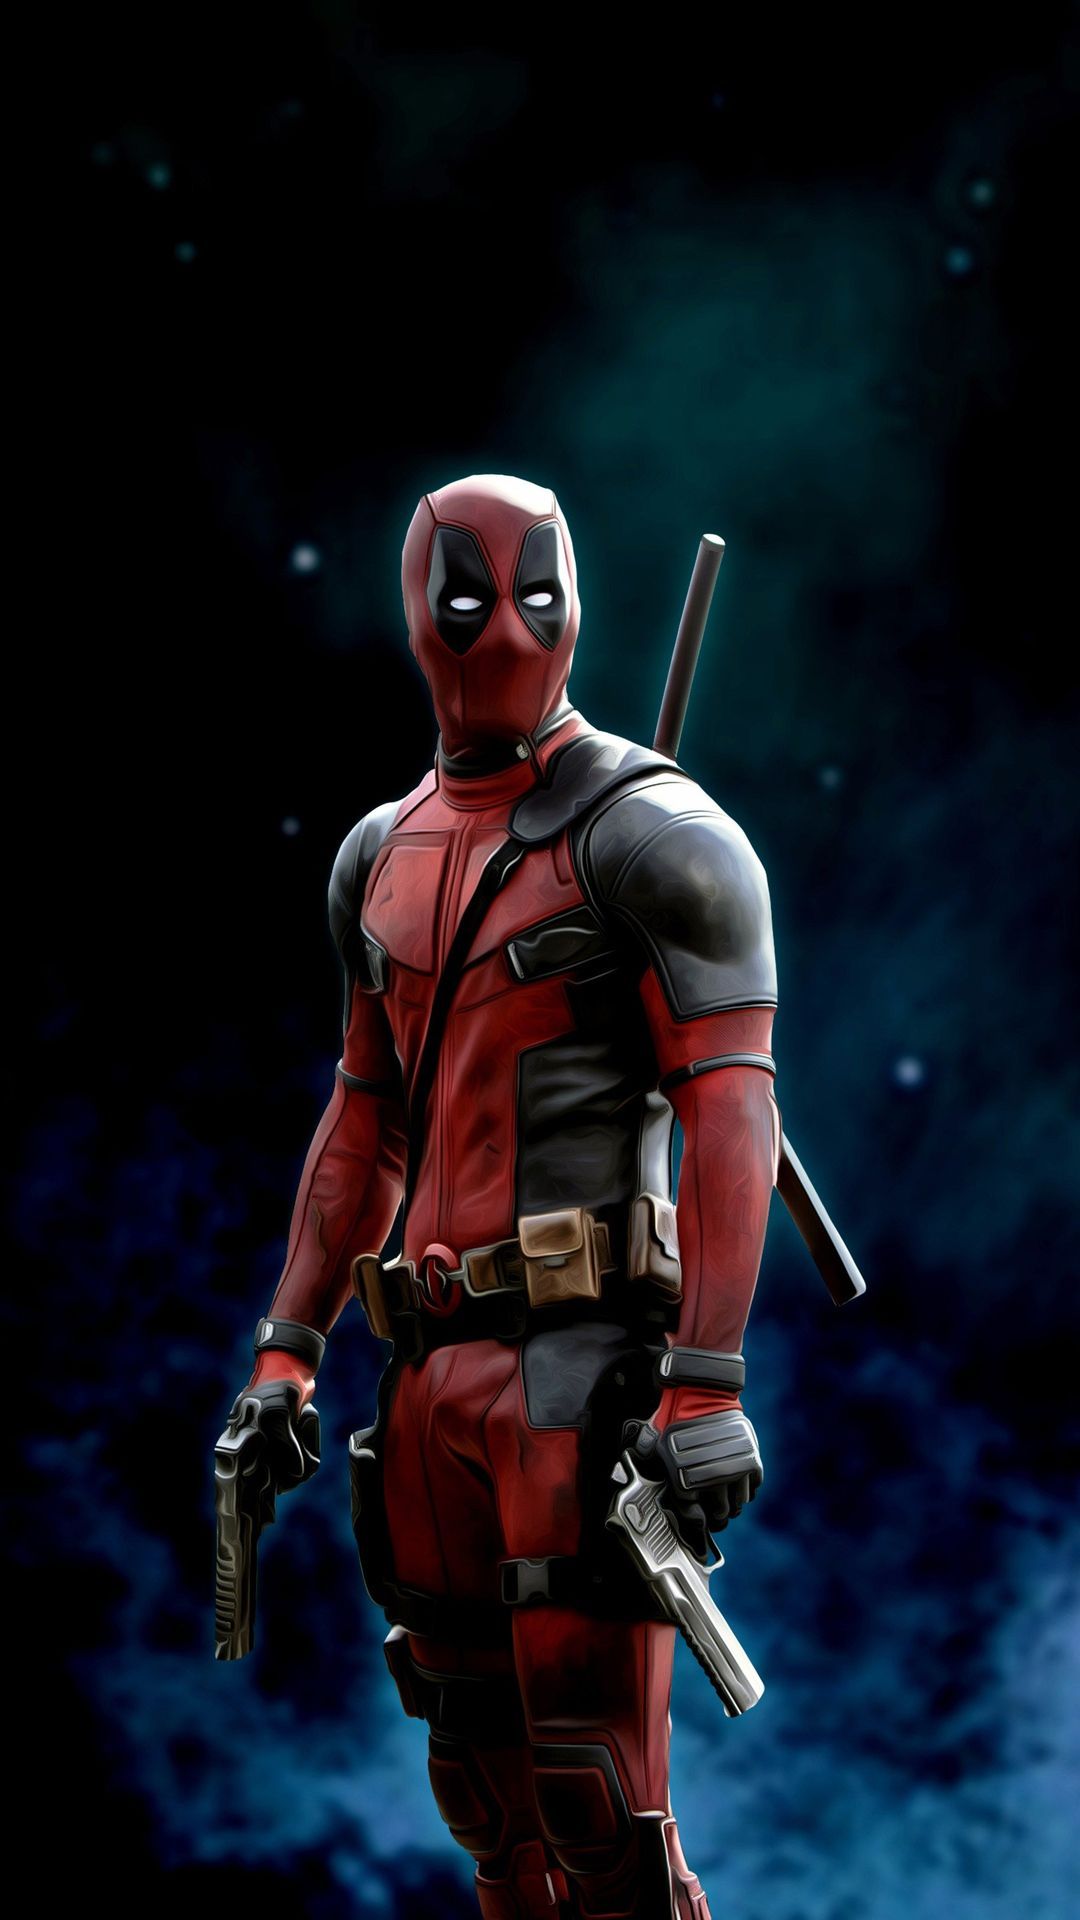 Deadpool Amoled Wallpaper 4K : Android Home Screen Android ...